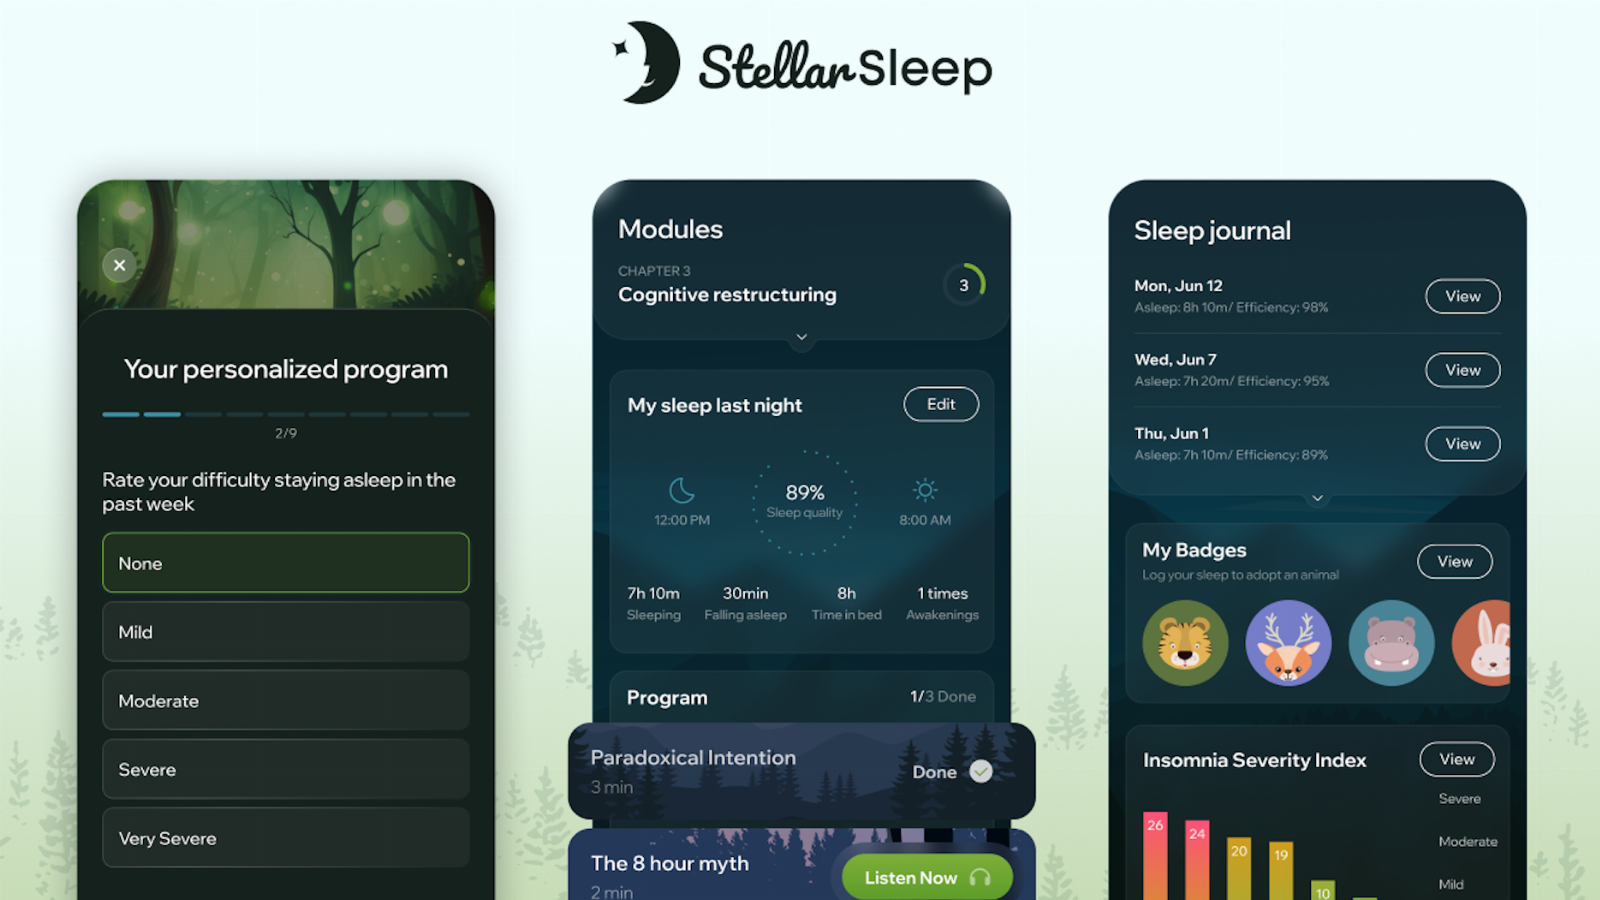 Stellar Sleep app gets initial funding to awaken root cause of chronic insomnia in users